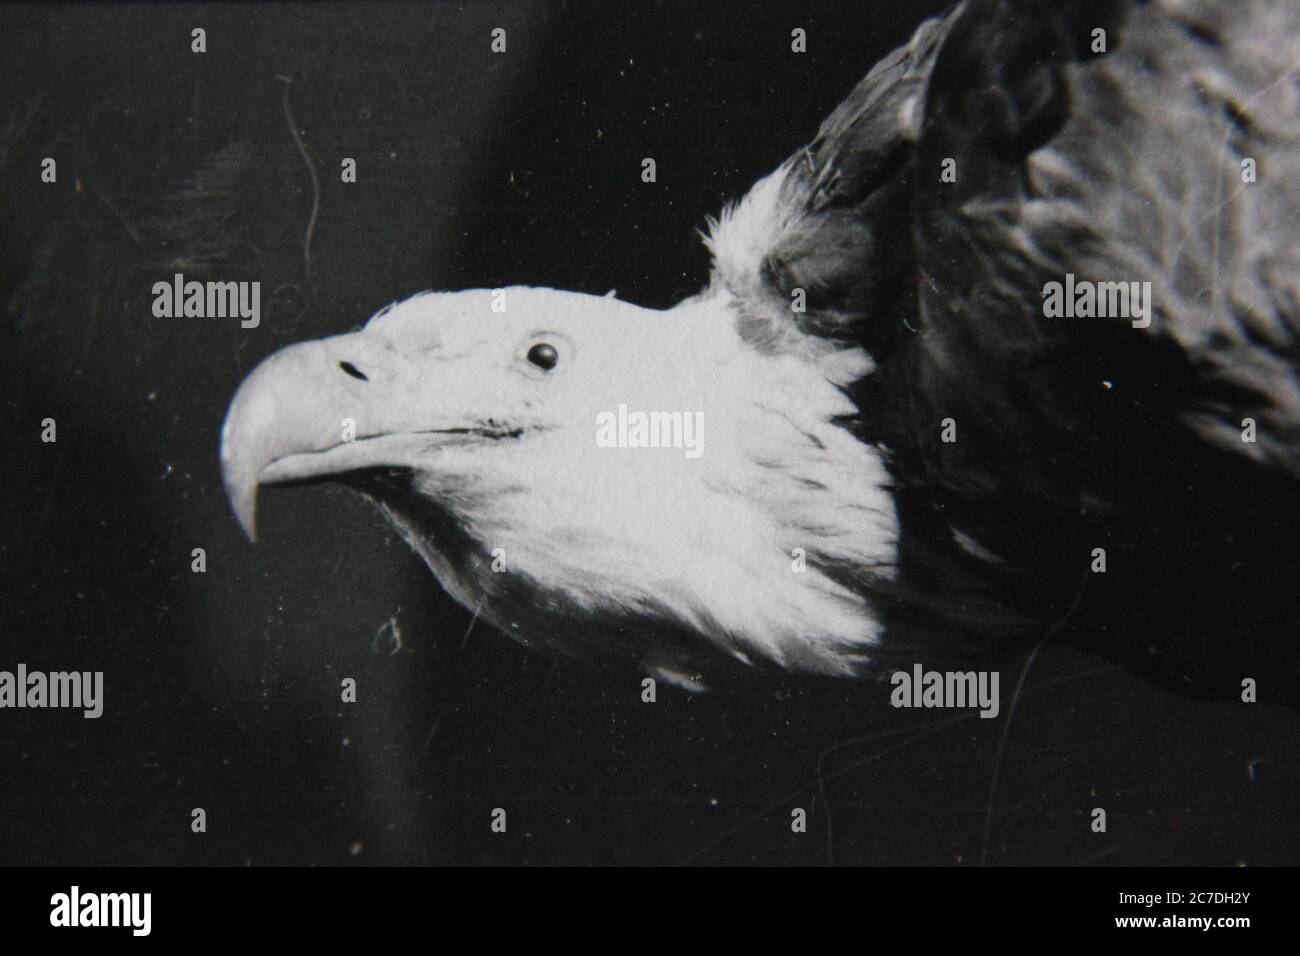 Fine 70s vintage black and white lifestyle photography of a stuffed bald eagle. Stock Photo